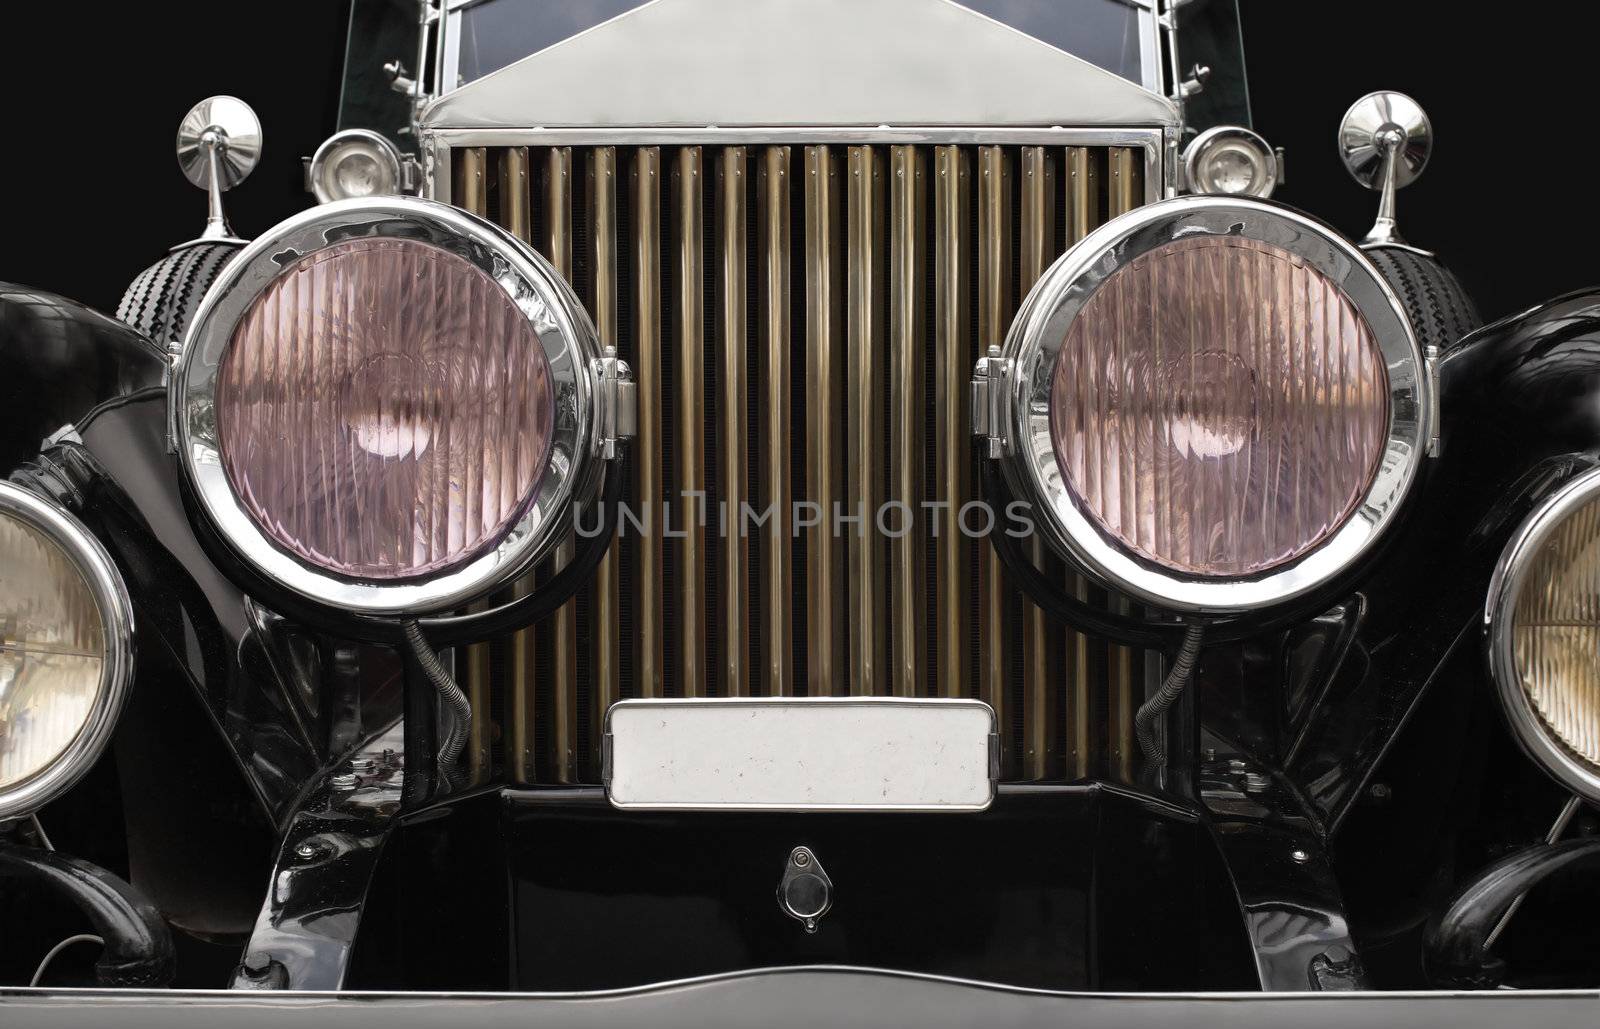 The grill and headlamps of an expensive antique classic car.  Slightly desaturated for more retro feel.  The pinkish tints in the headlight glass are normal and not added/altered.
